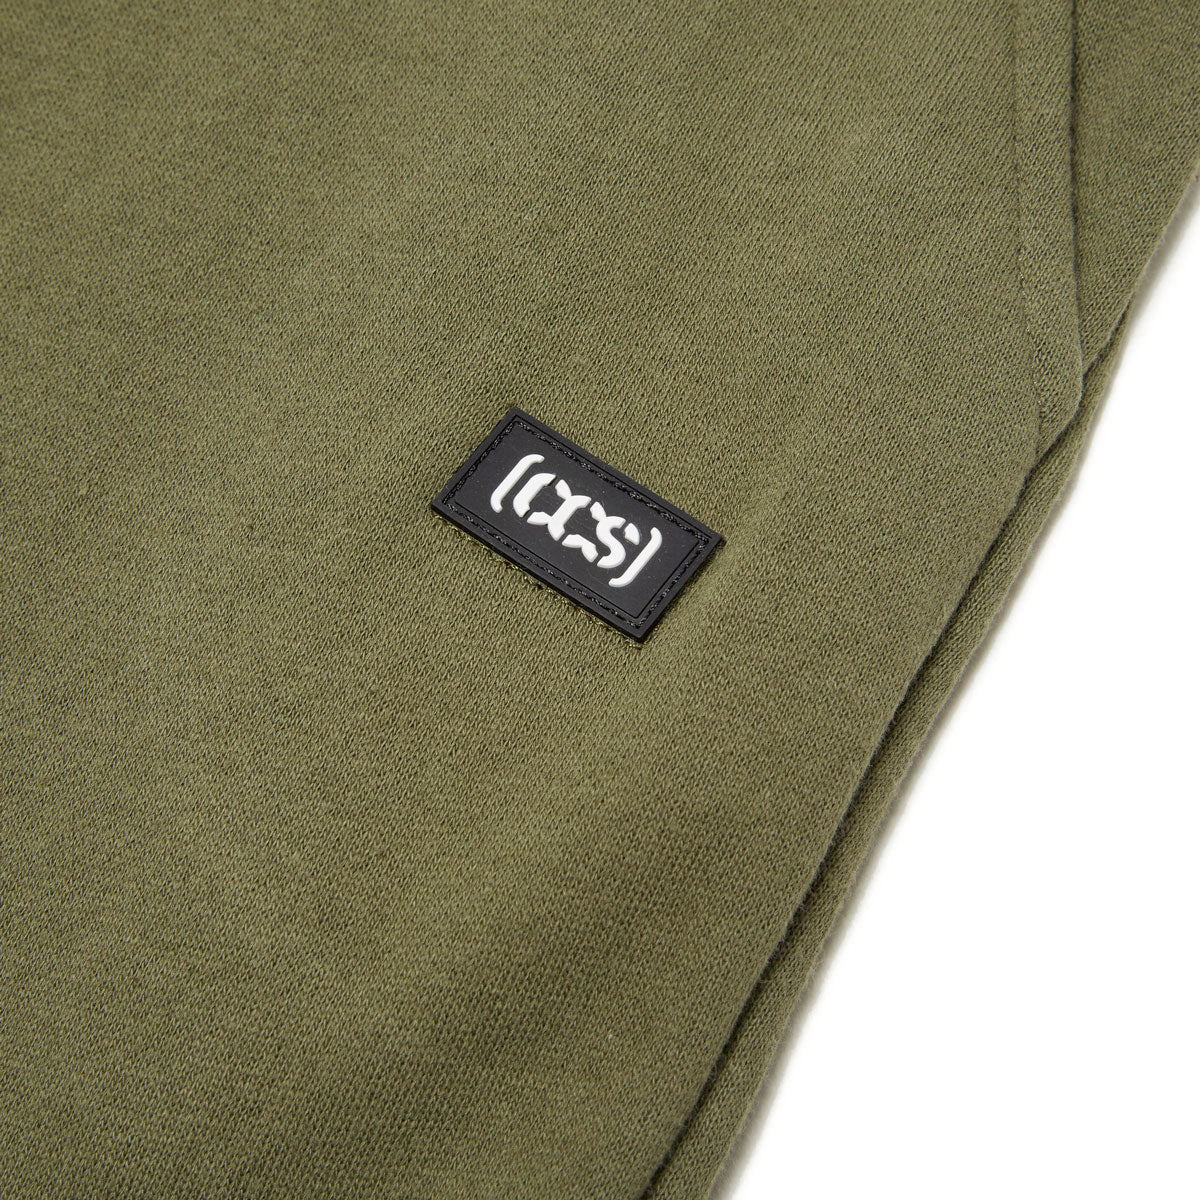 CCS Logo Rubber Patch Sweat Pants - Army Green image 2